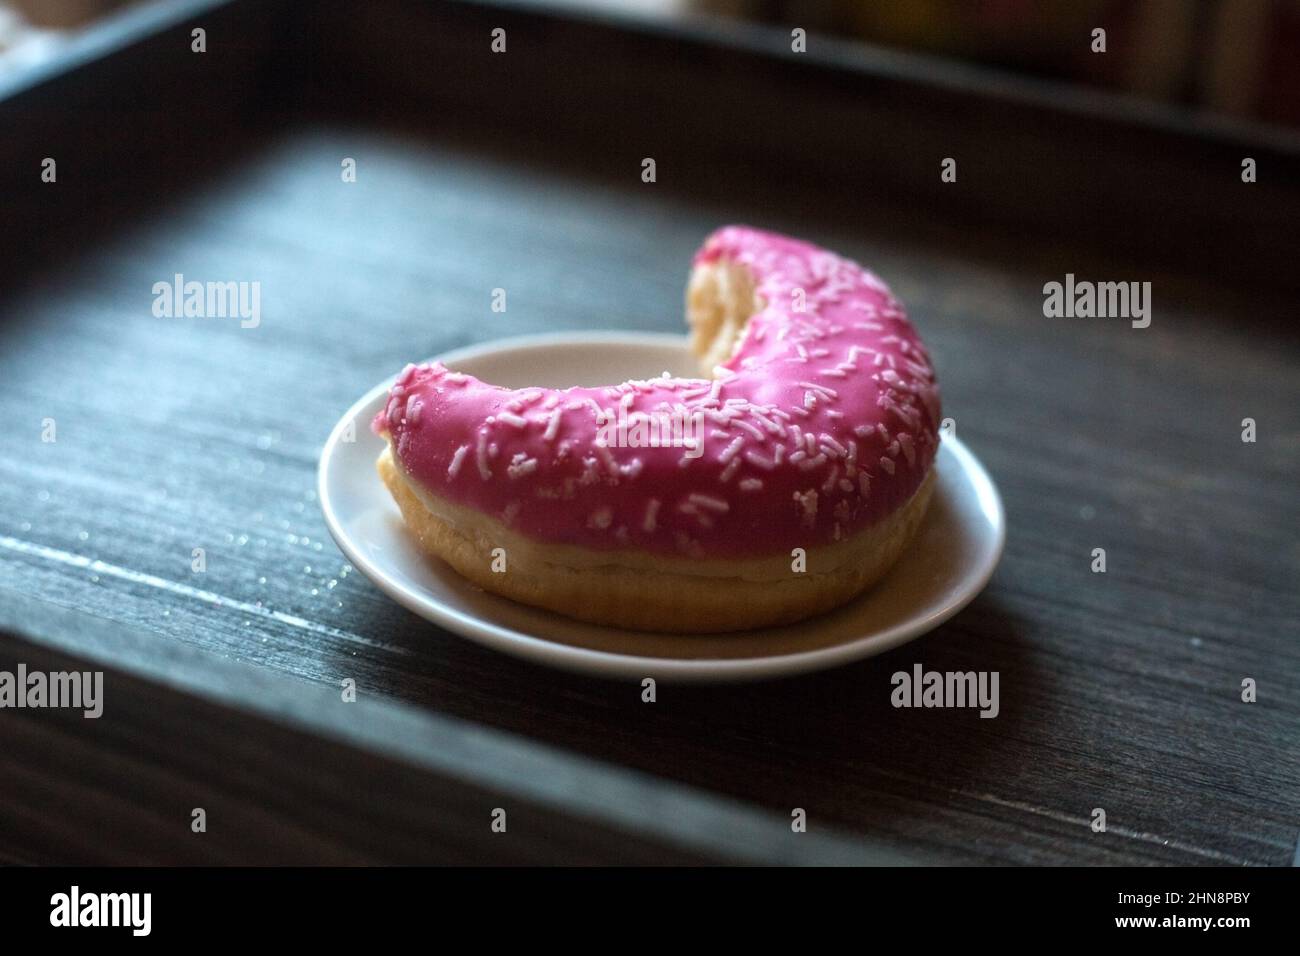 Side view to half eaten bright pink donut on white round plate. Aged wooden background. Isolated object. Traditional American sweets for breakfast Stock Photo